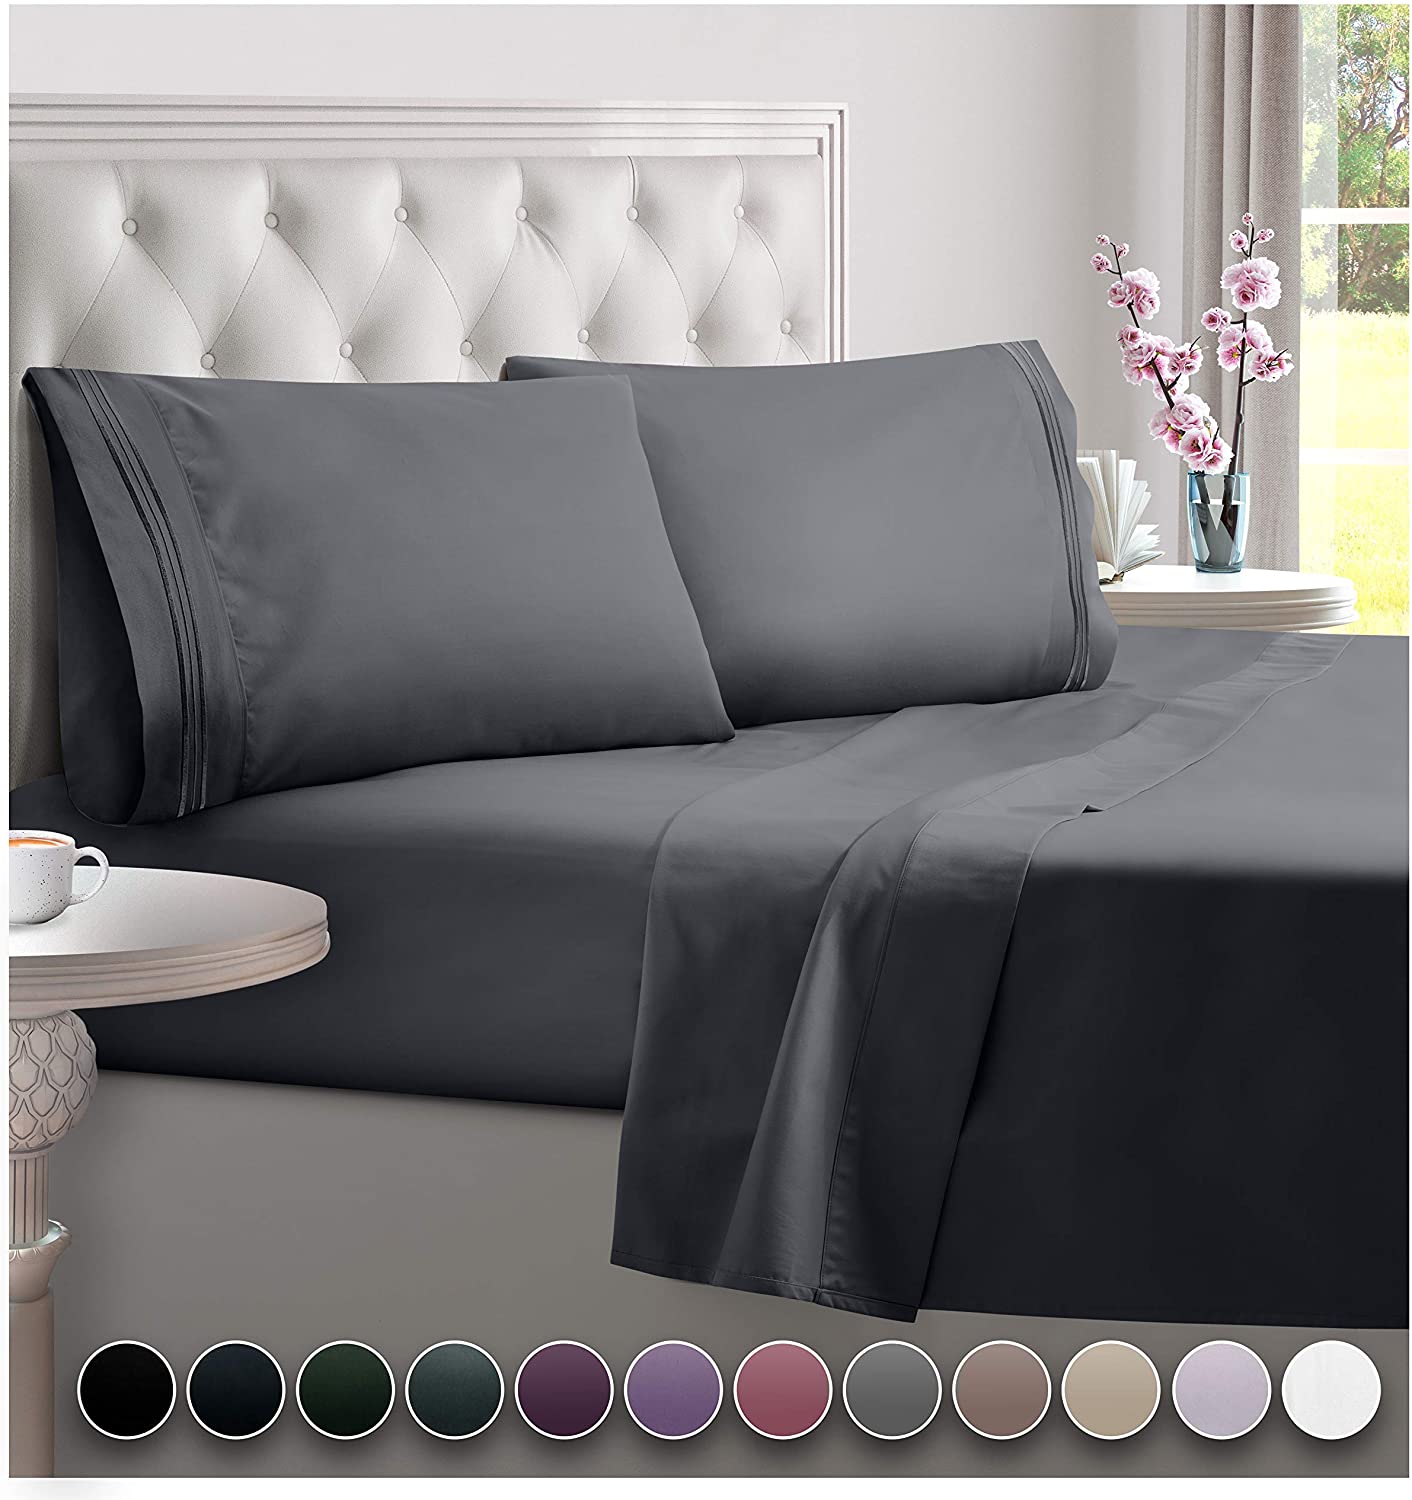 DREAMCARE - Bed Sheets Set - Queen Size Sheet with Side Pocket - 4pcs Set,  15 inches, Gray